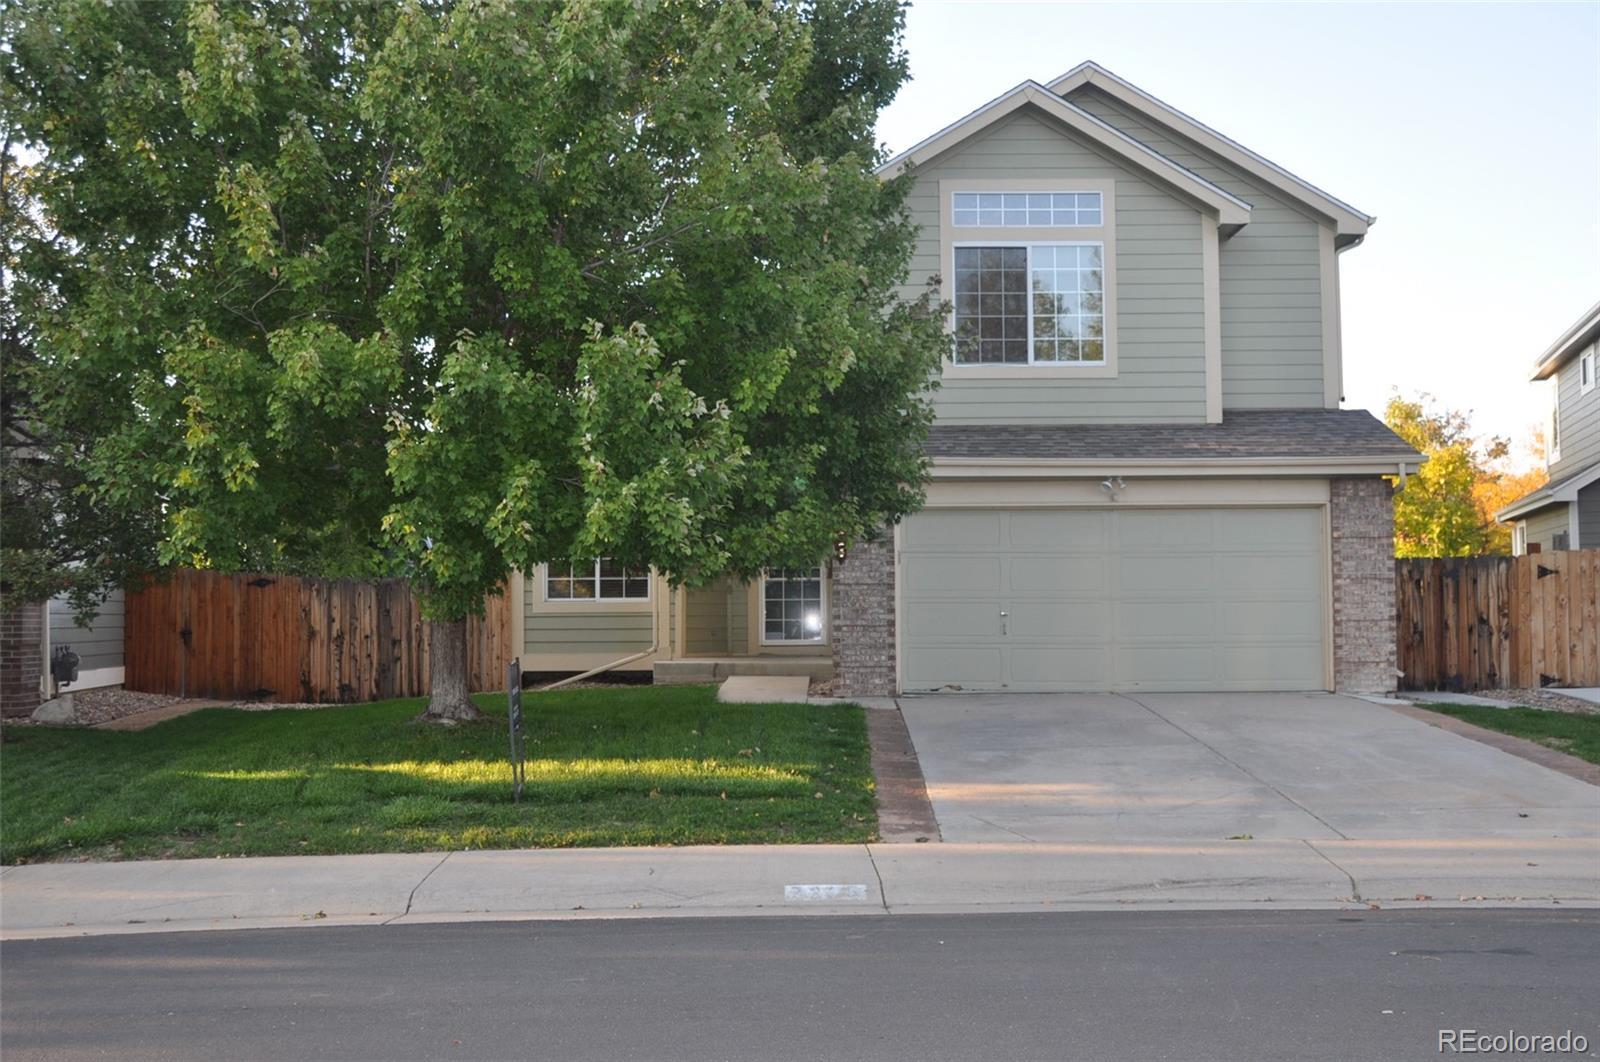 7225 97th, Westminster, CO